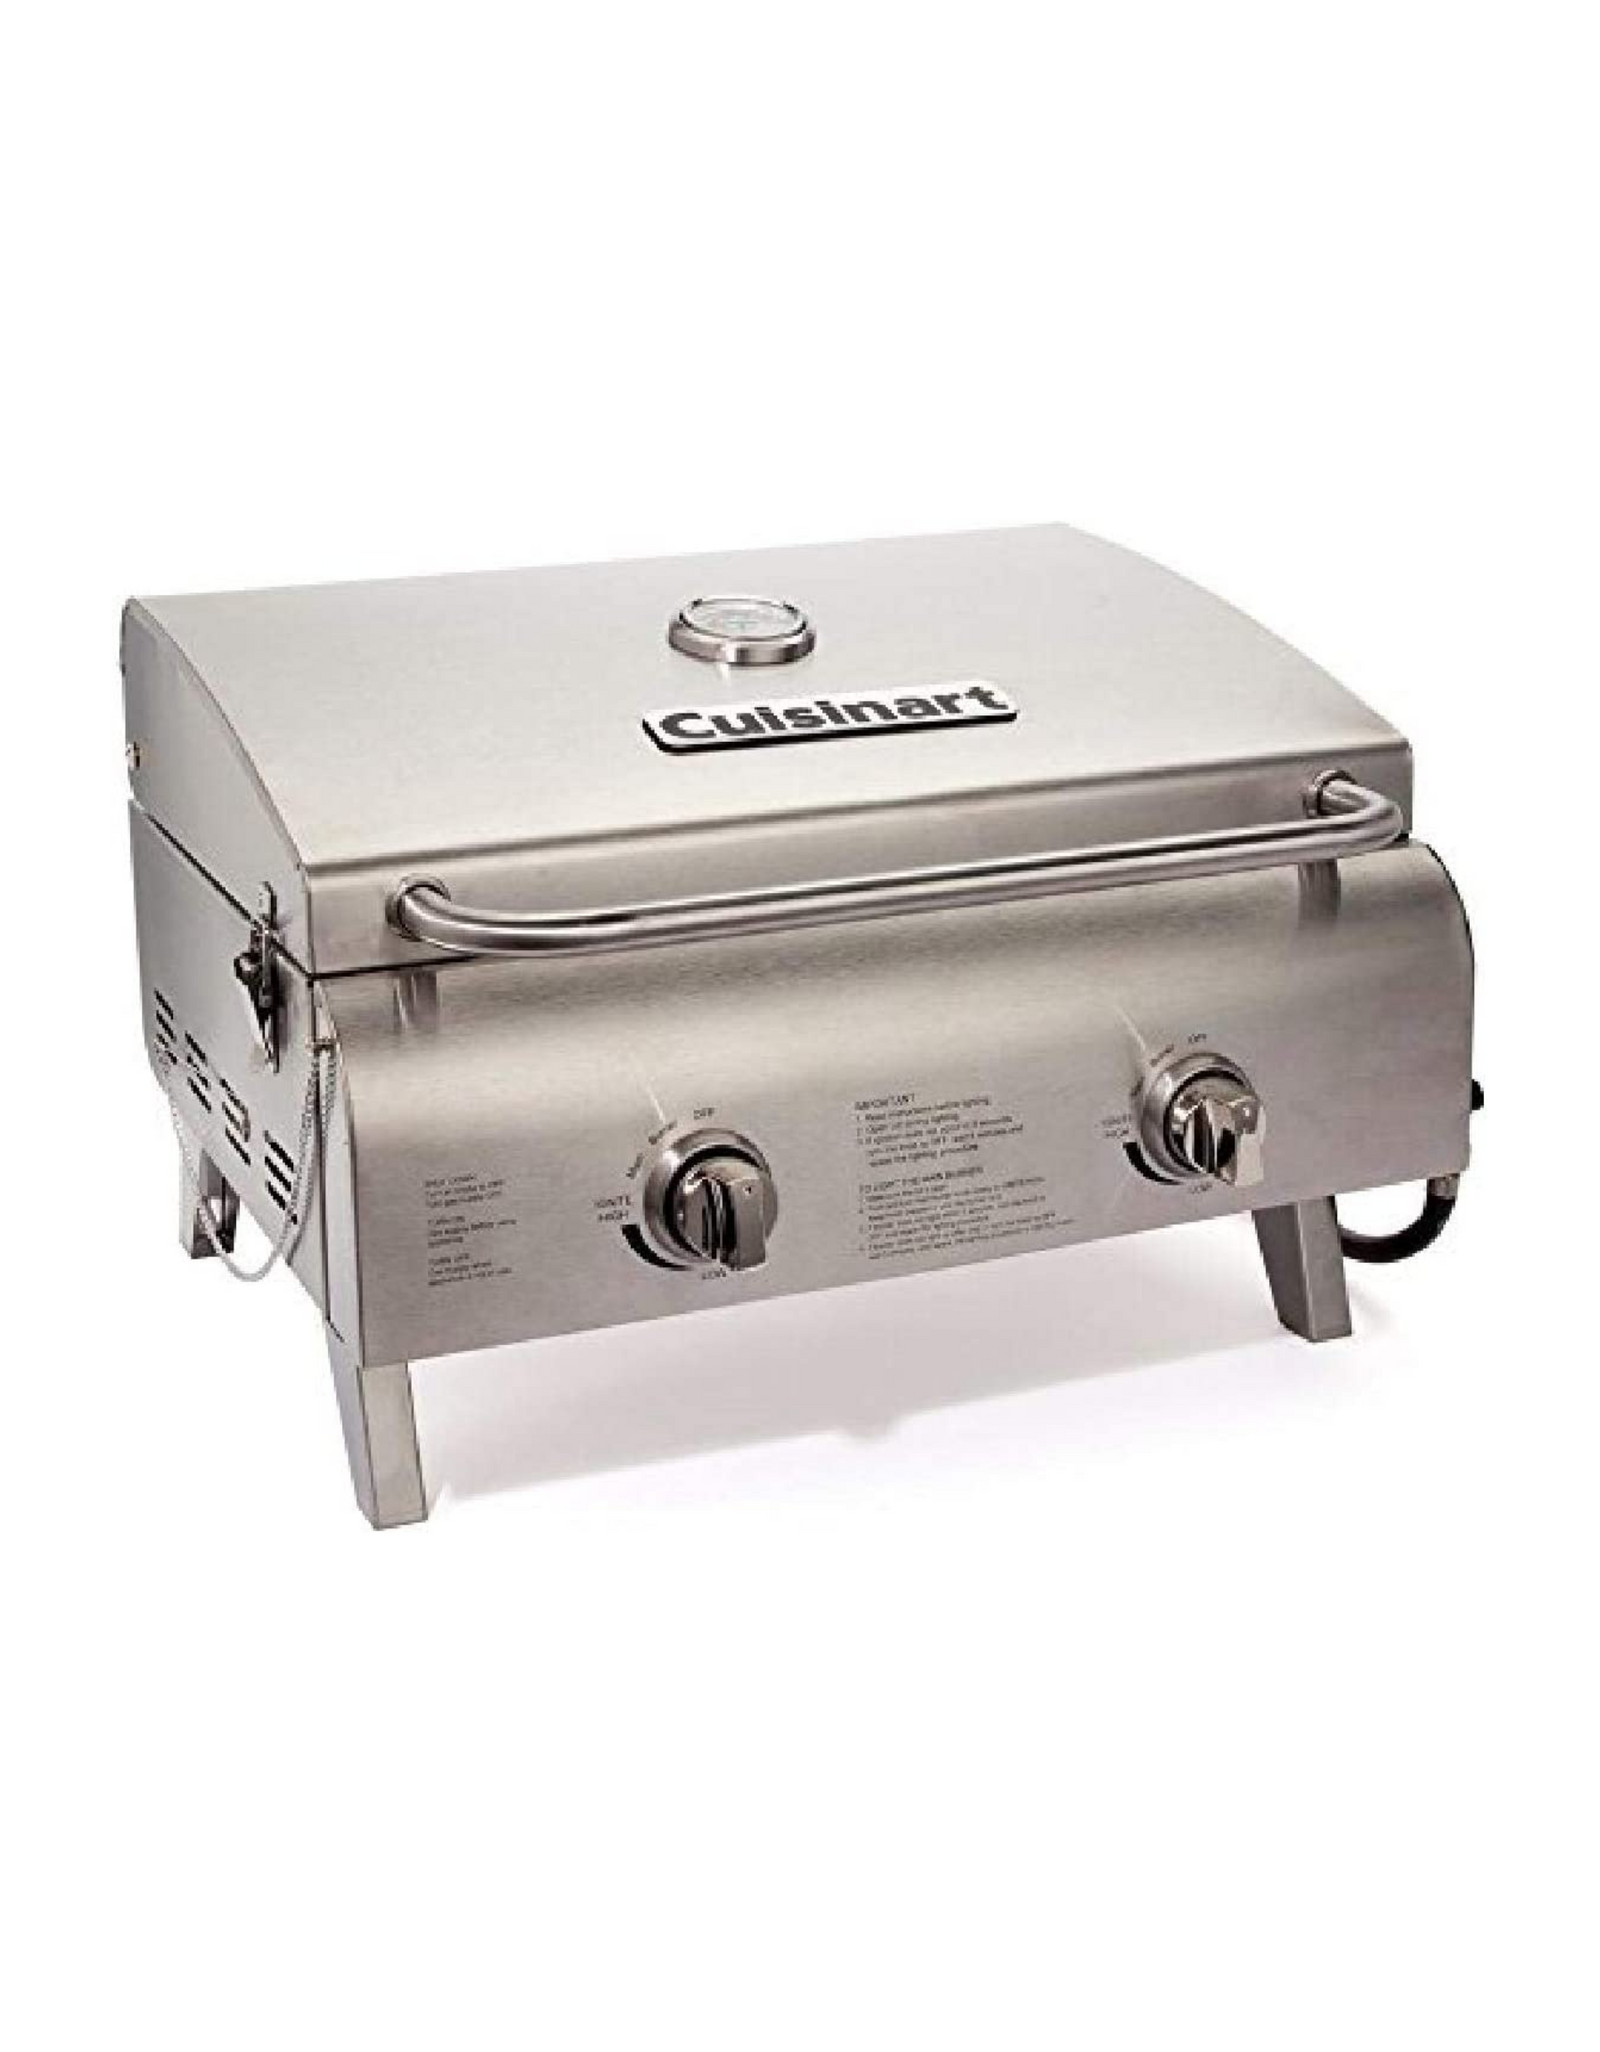 Cuisinart CGG-306 Chef's Style Portable Propane Tabletop, Two 20,000 BTU Burners, Stainless Steel